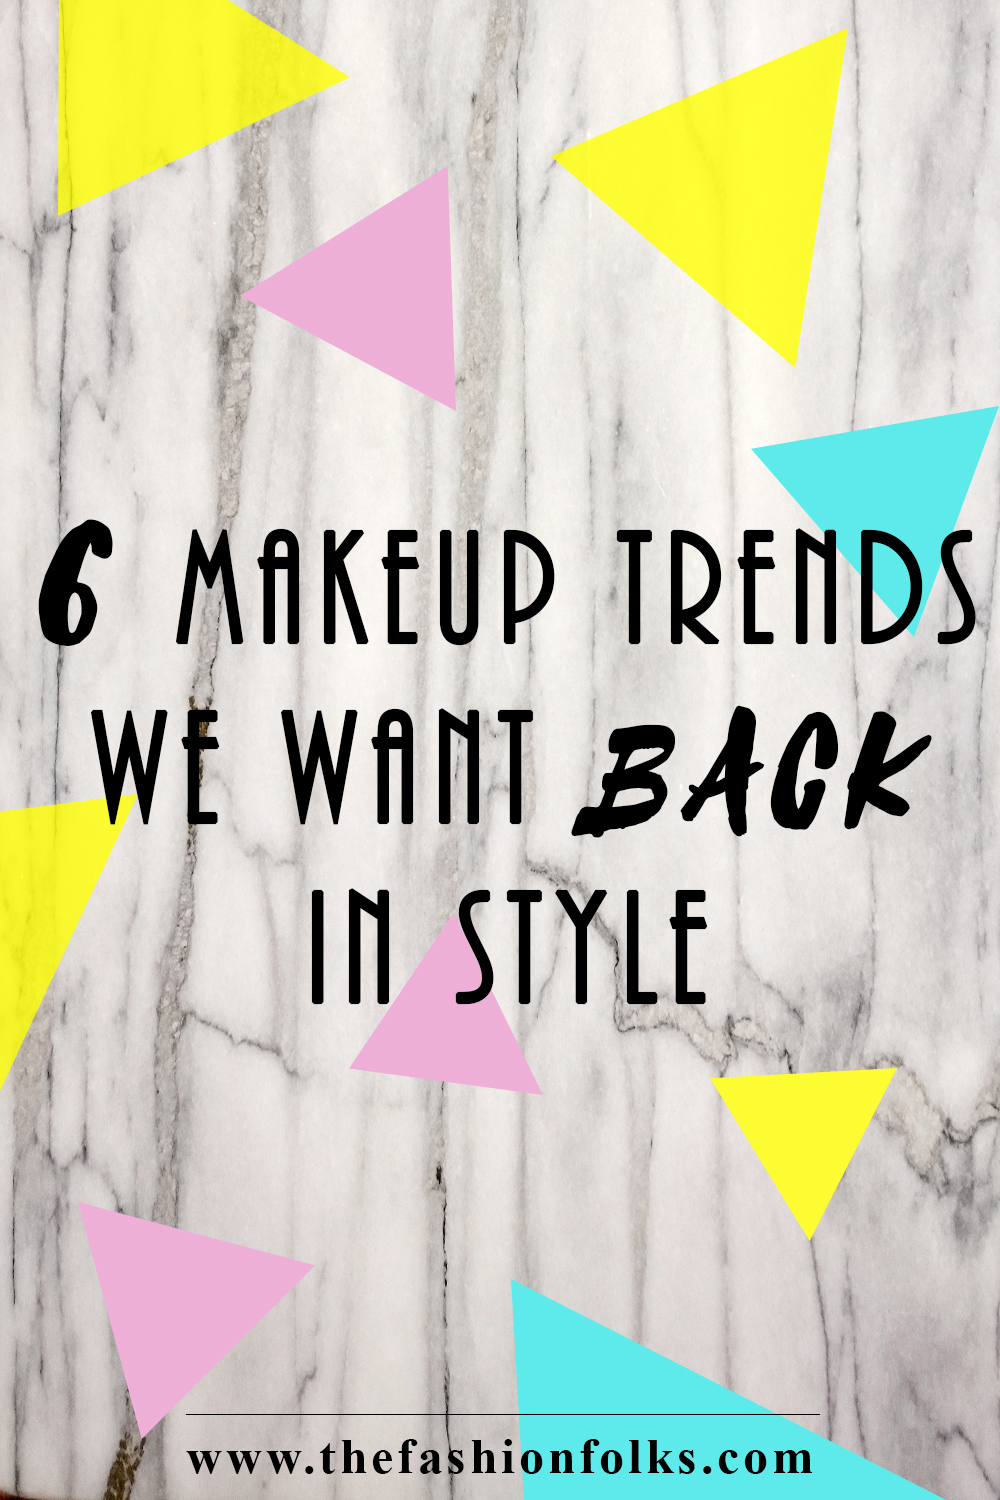 Makeup Trends We Want Back | The Fashion Folks